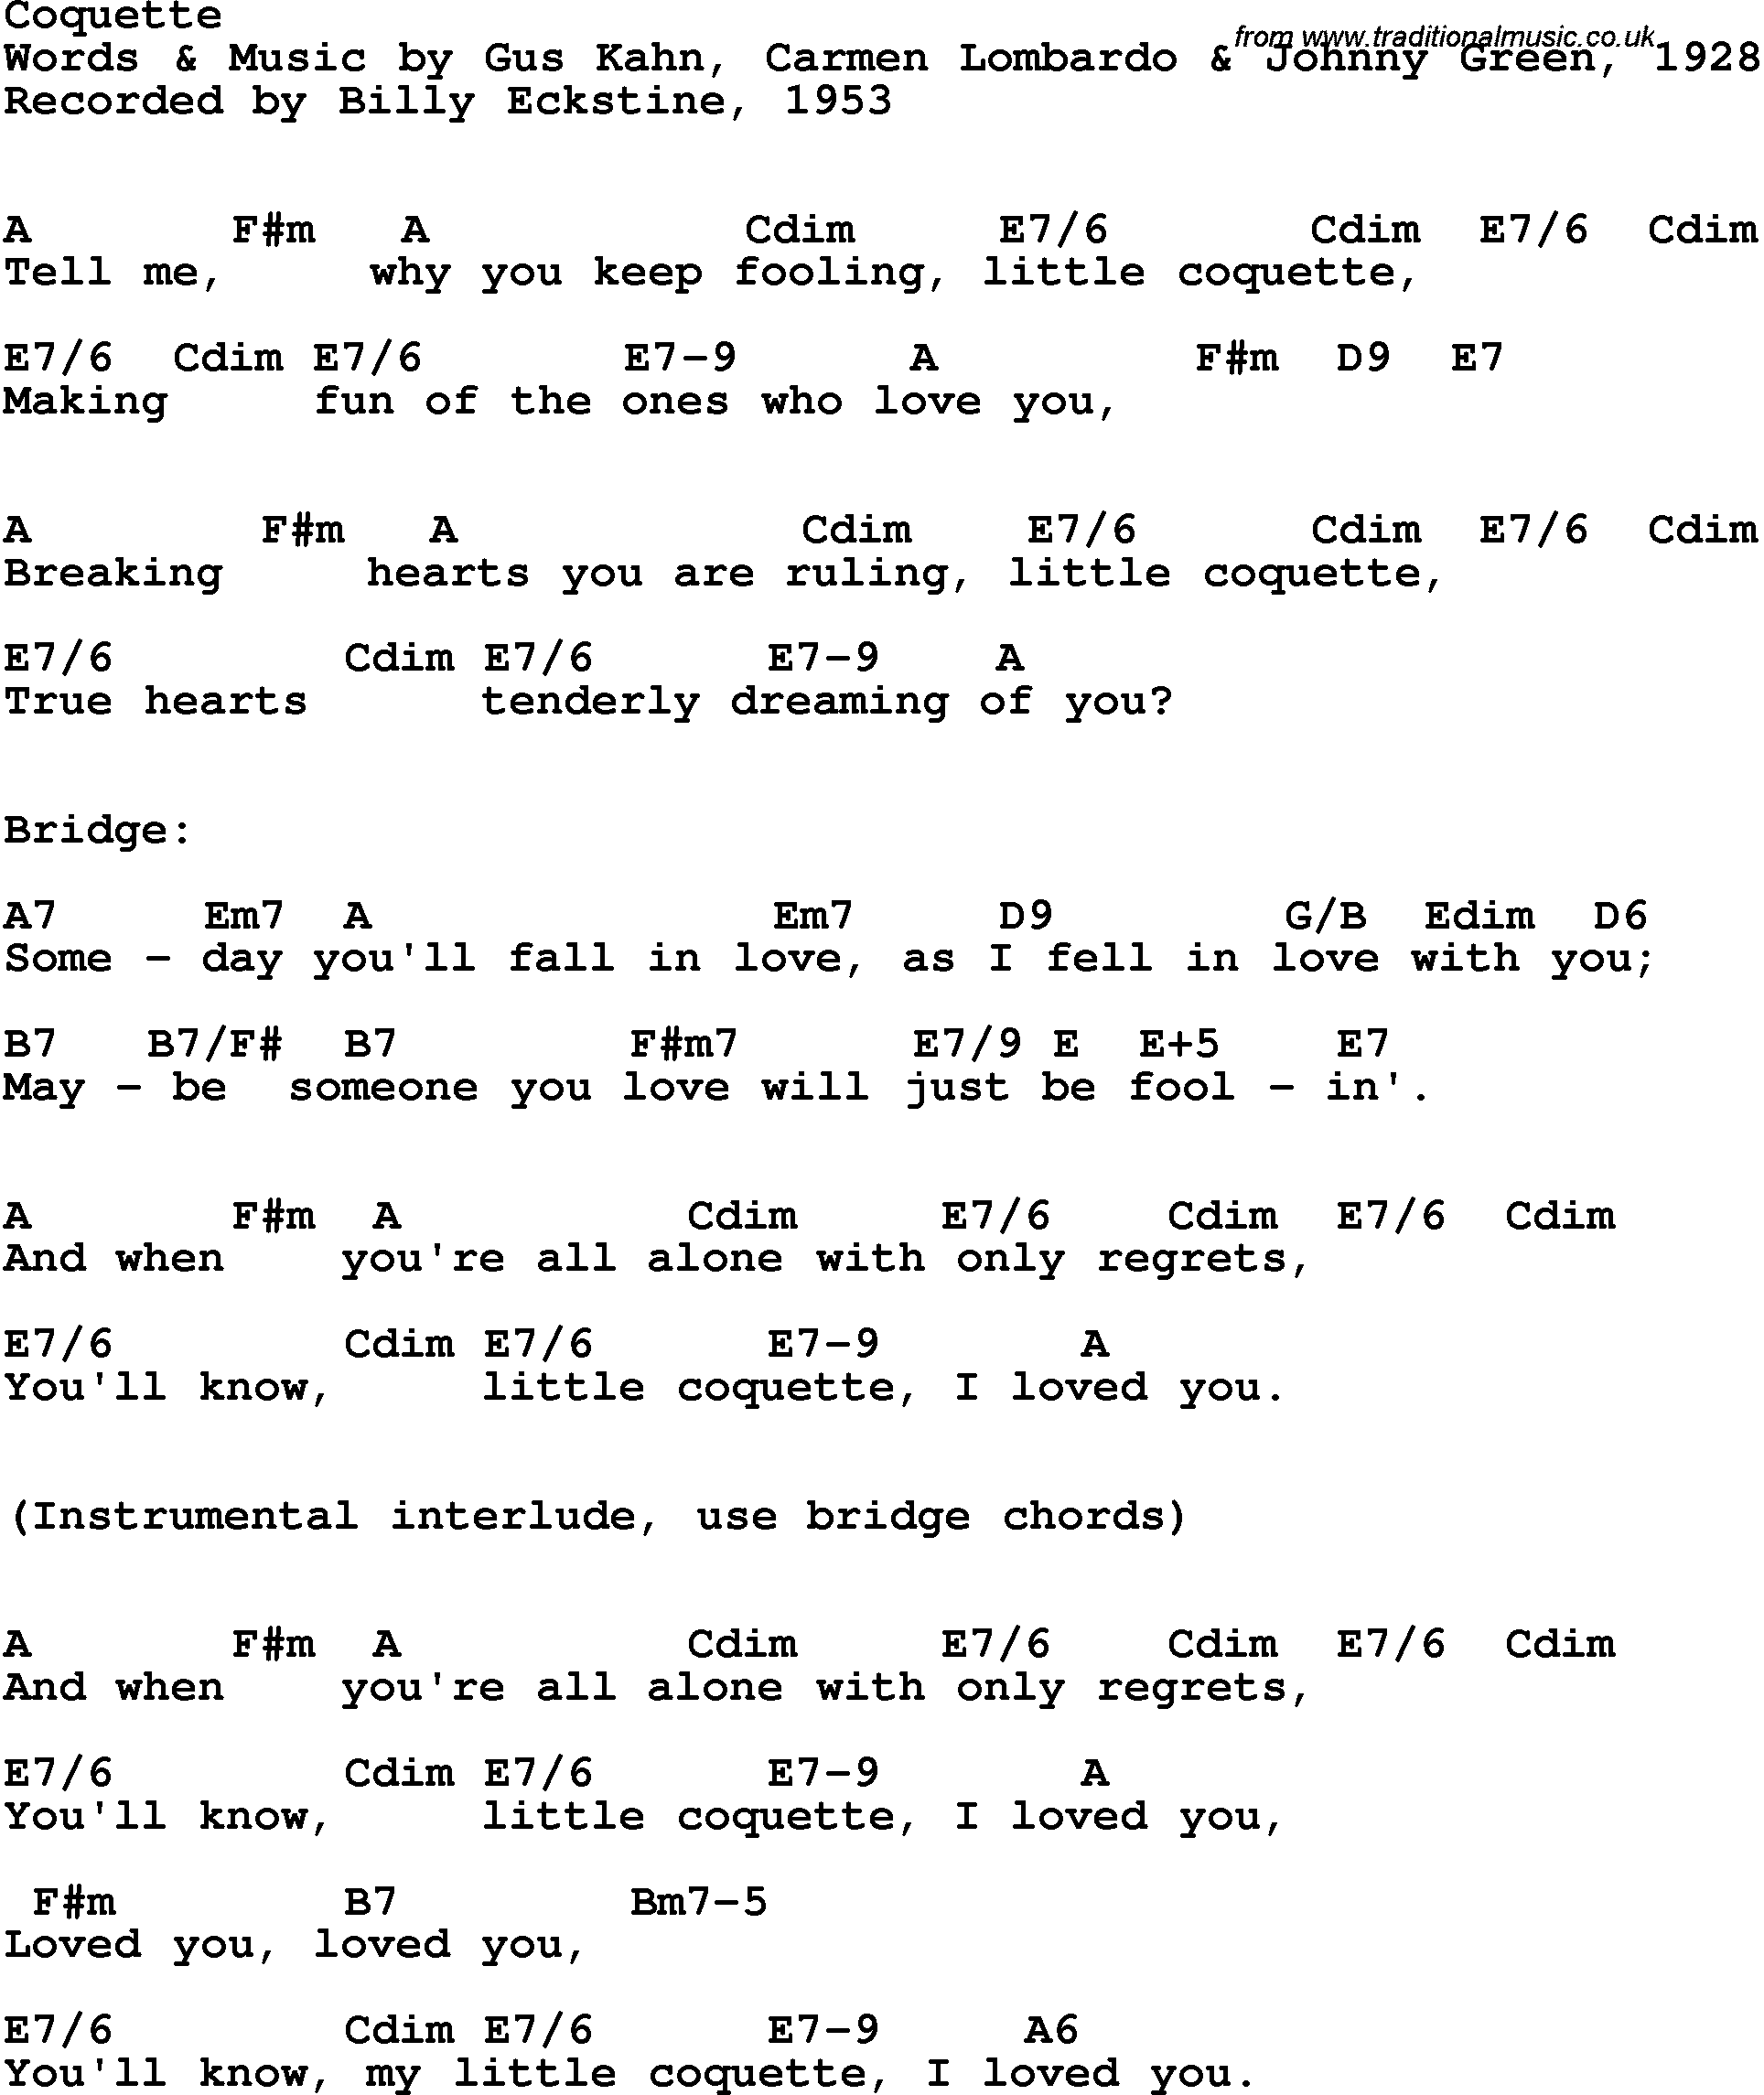 Song Lyrics with guitar chords for Coquette - Billy Eckstine, 1953